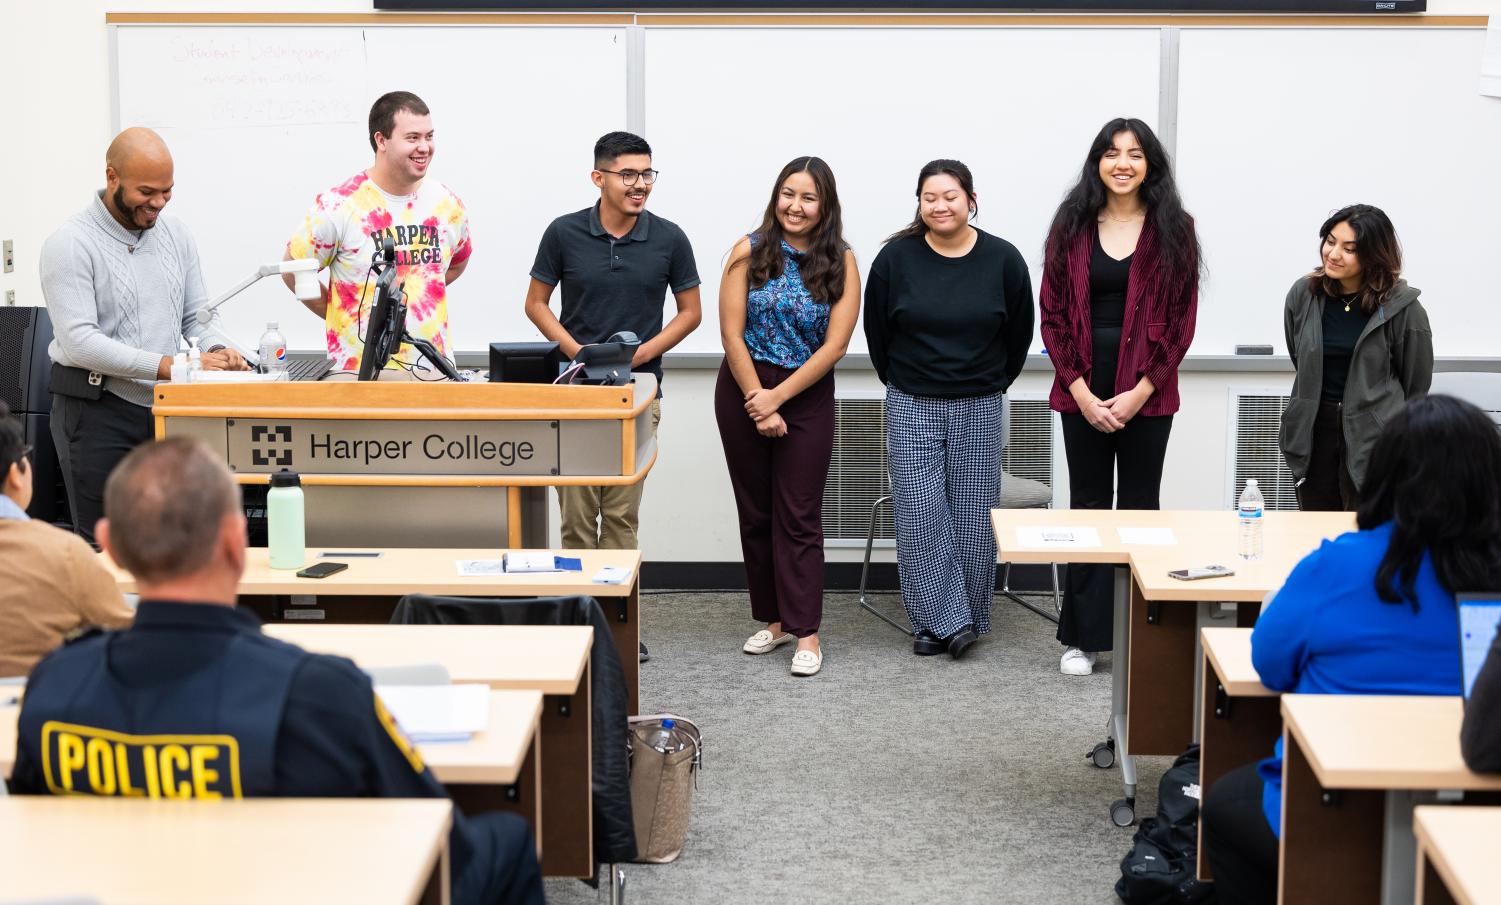 Members of the Student Government Association introduce themselves at their November 1 town hall meeting, which discussed the steps Harper could take to rebuild student communities on campus post-pandemic. (Photo courtesy of Michael Hubatch)